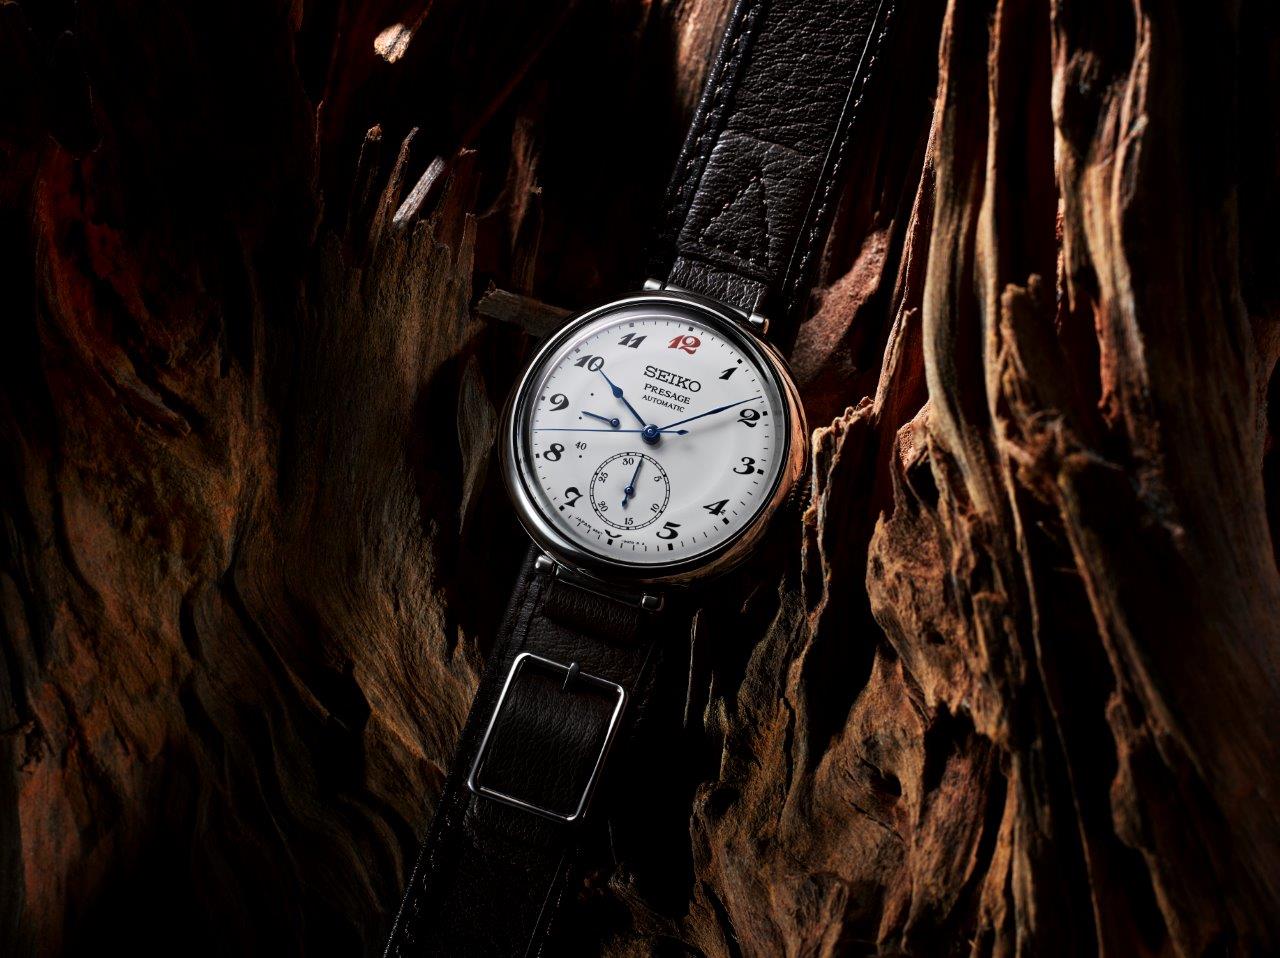 Seiko reissues its very first wristwatch 110 years after the original